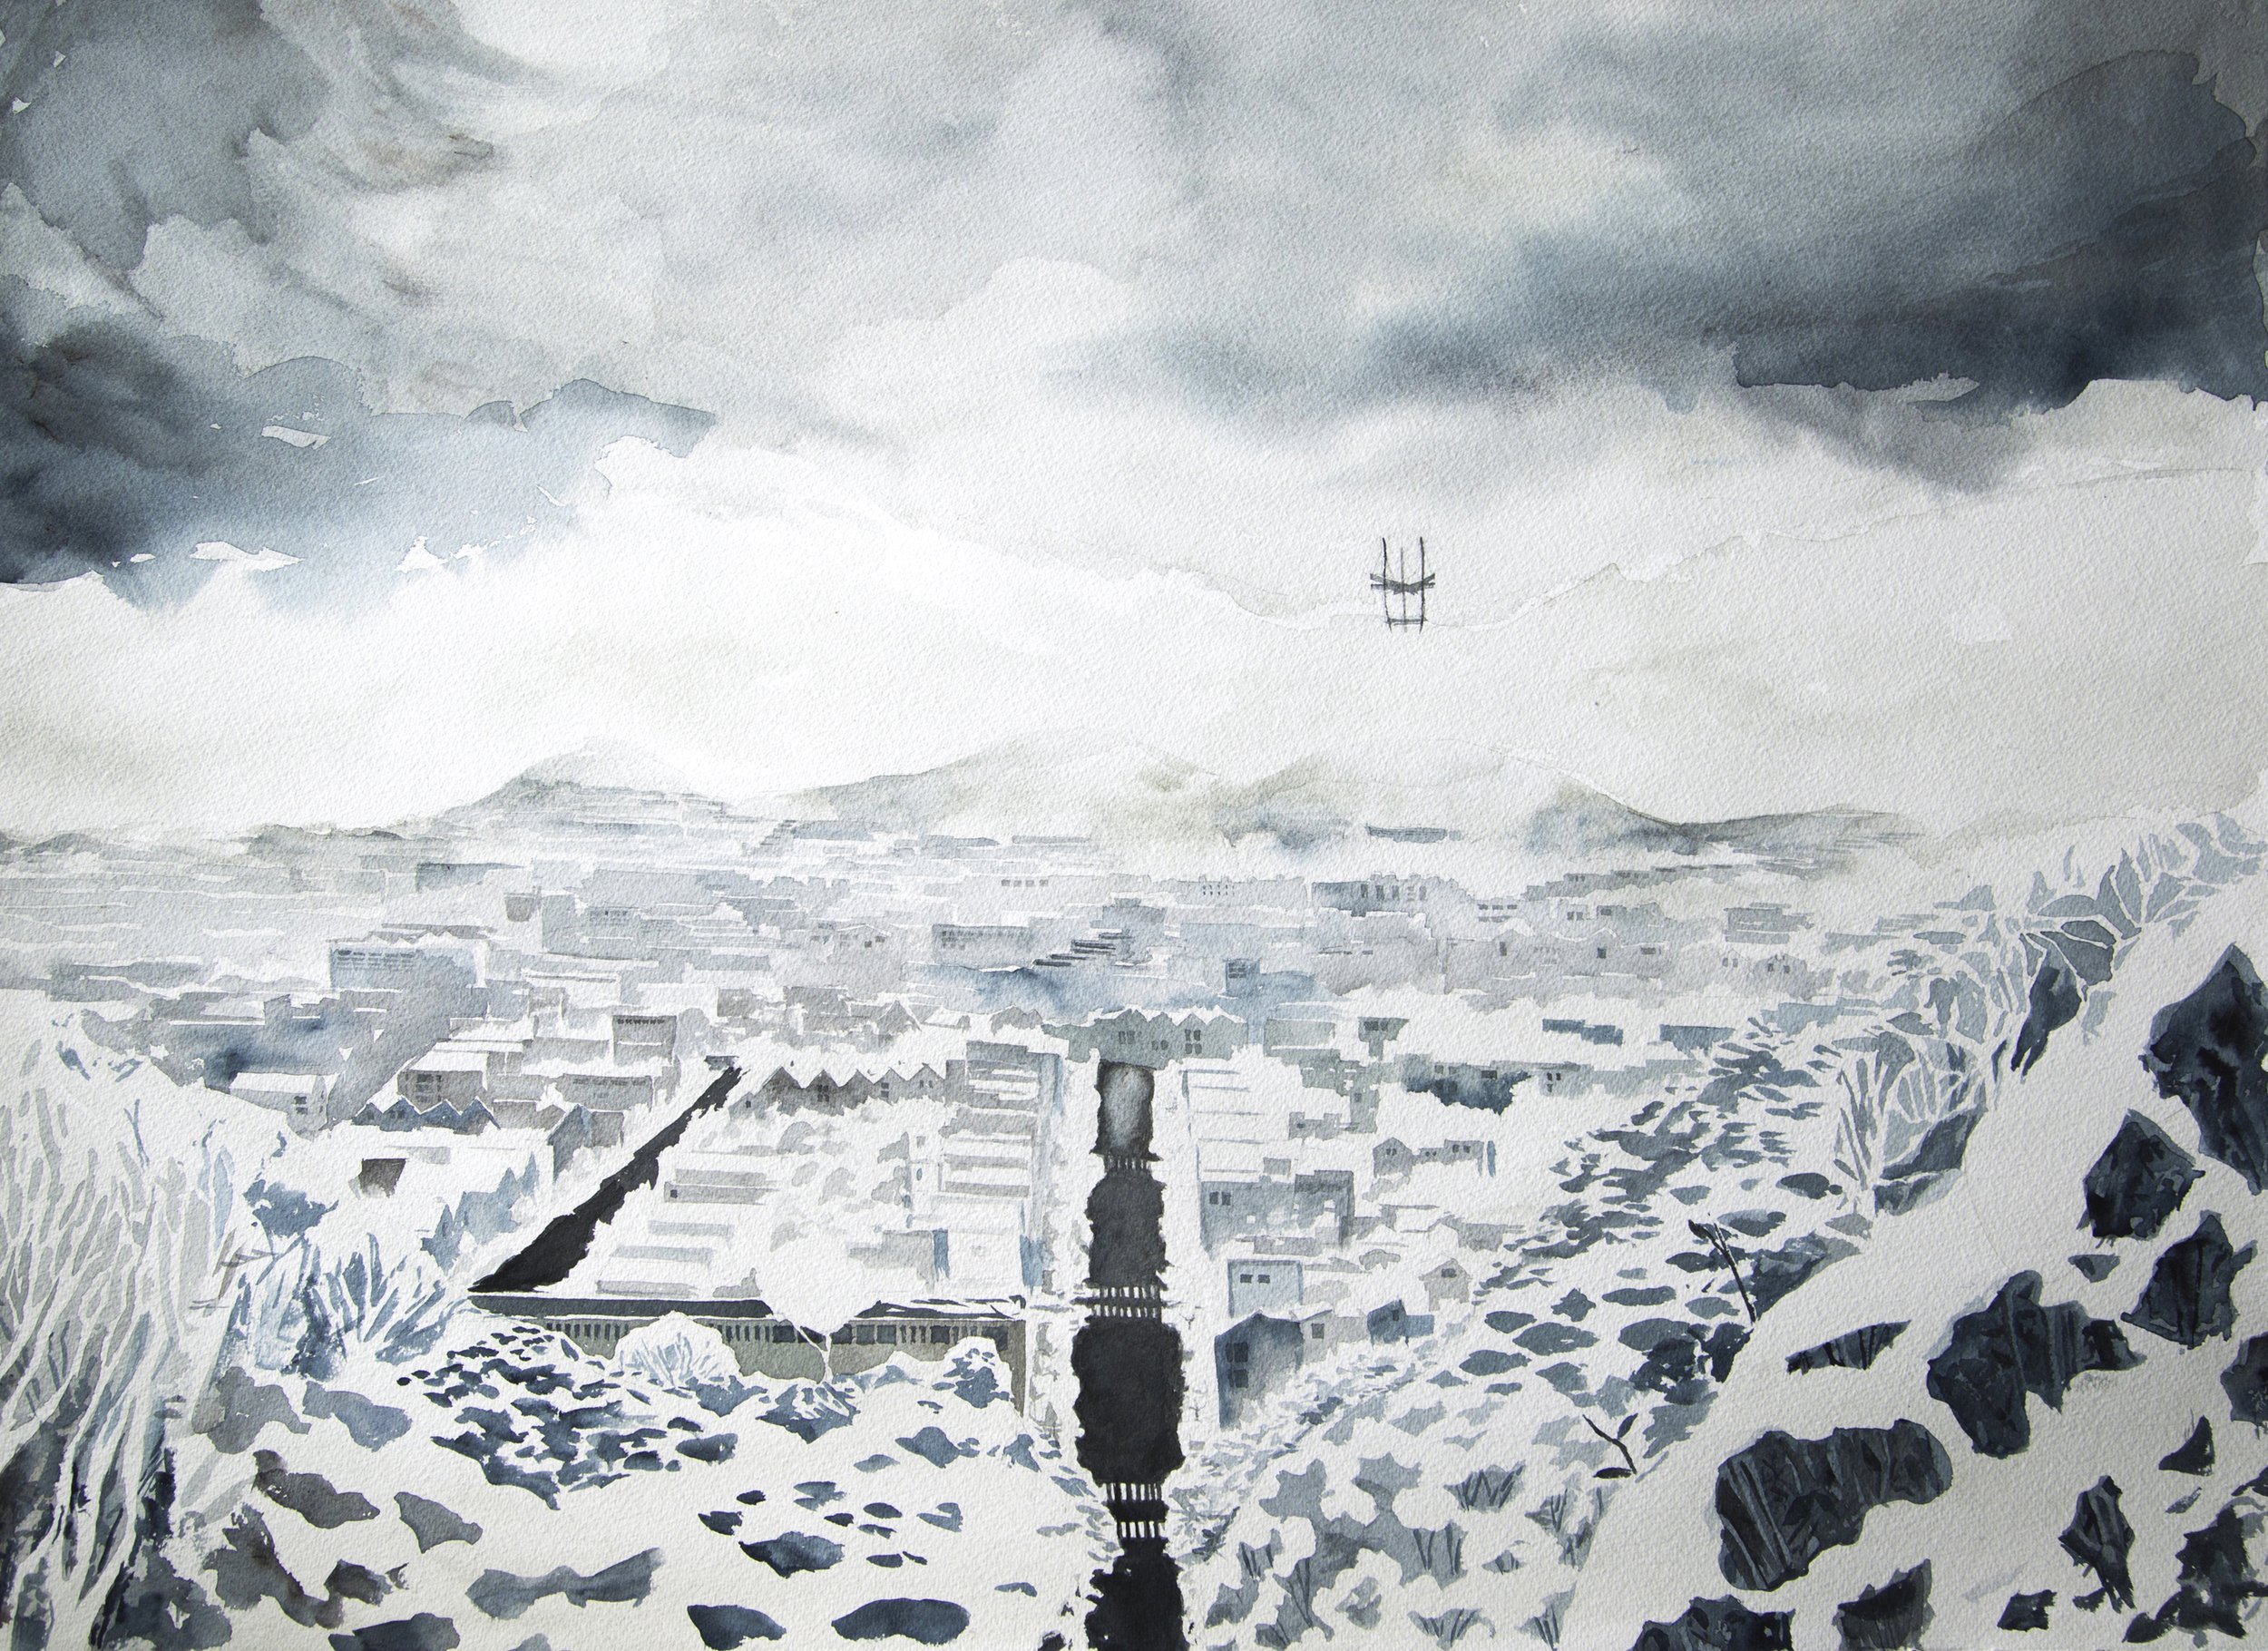 <i>San Francisco in the Snow: Twin Peaks</i>, 22 x 30", watercolor on paper, 2013